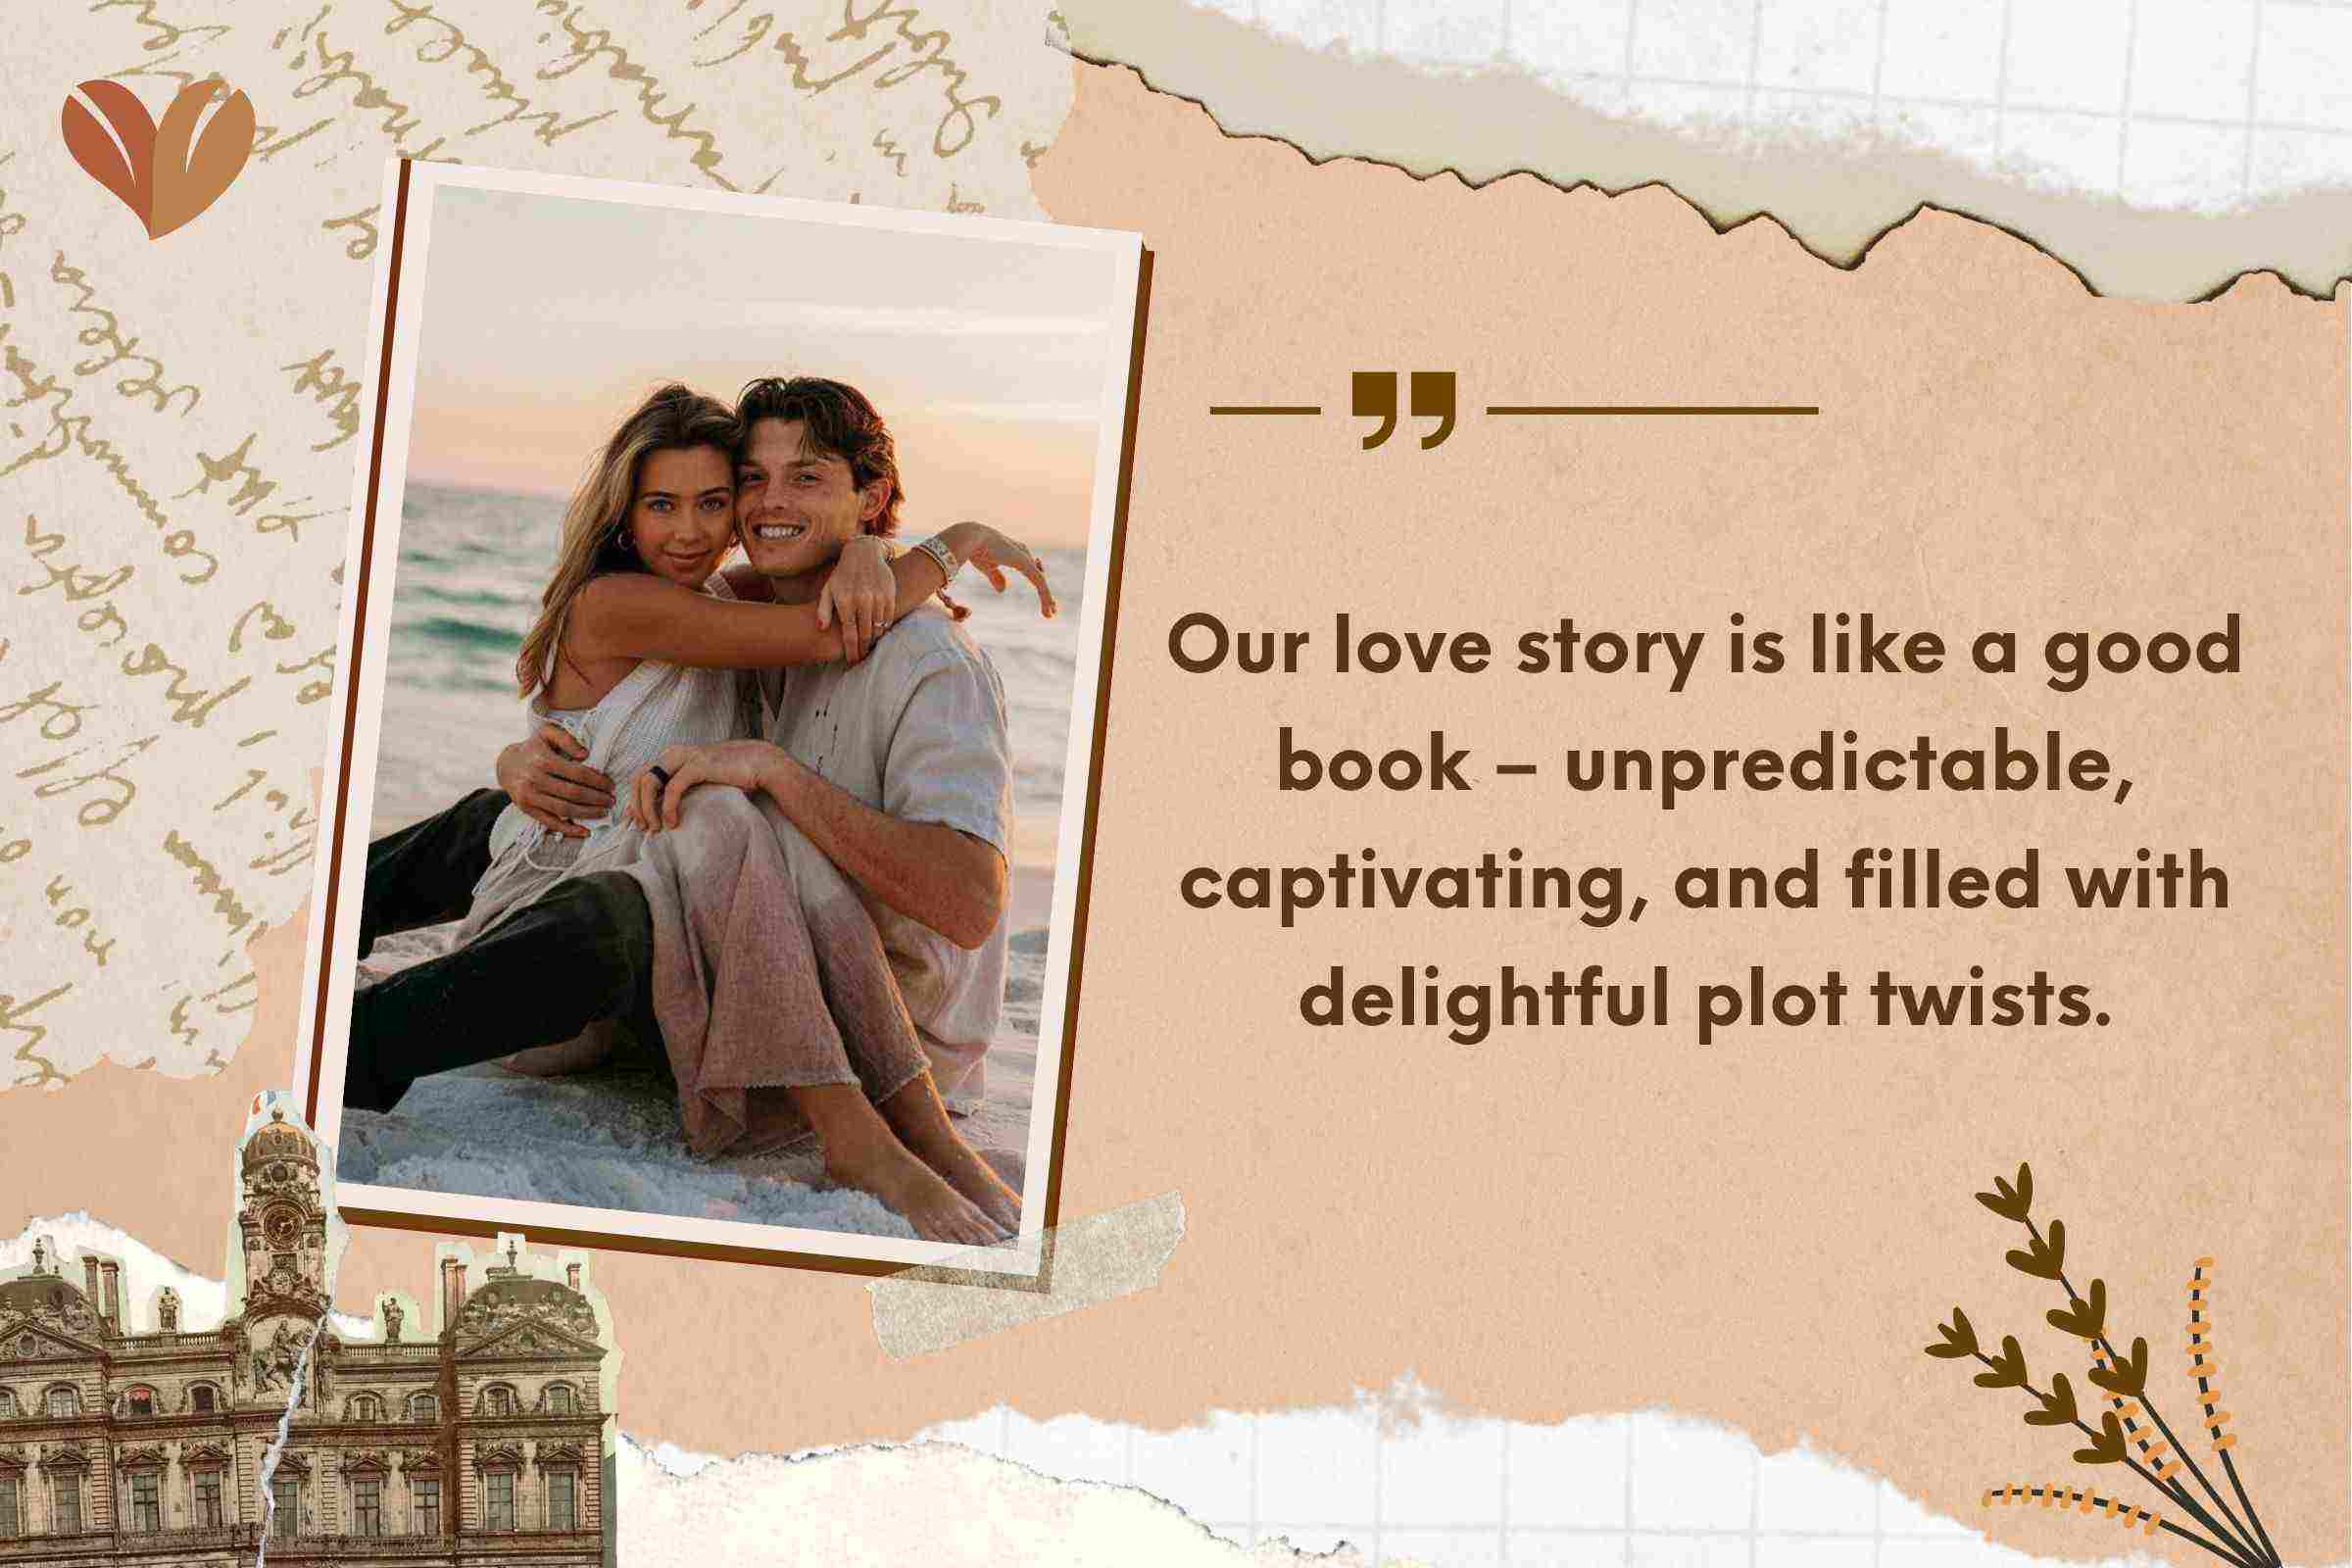 Our love story is like a good book – unpredictable, captivating, and filled with delightful plot twists.